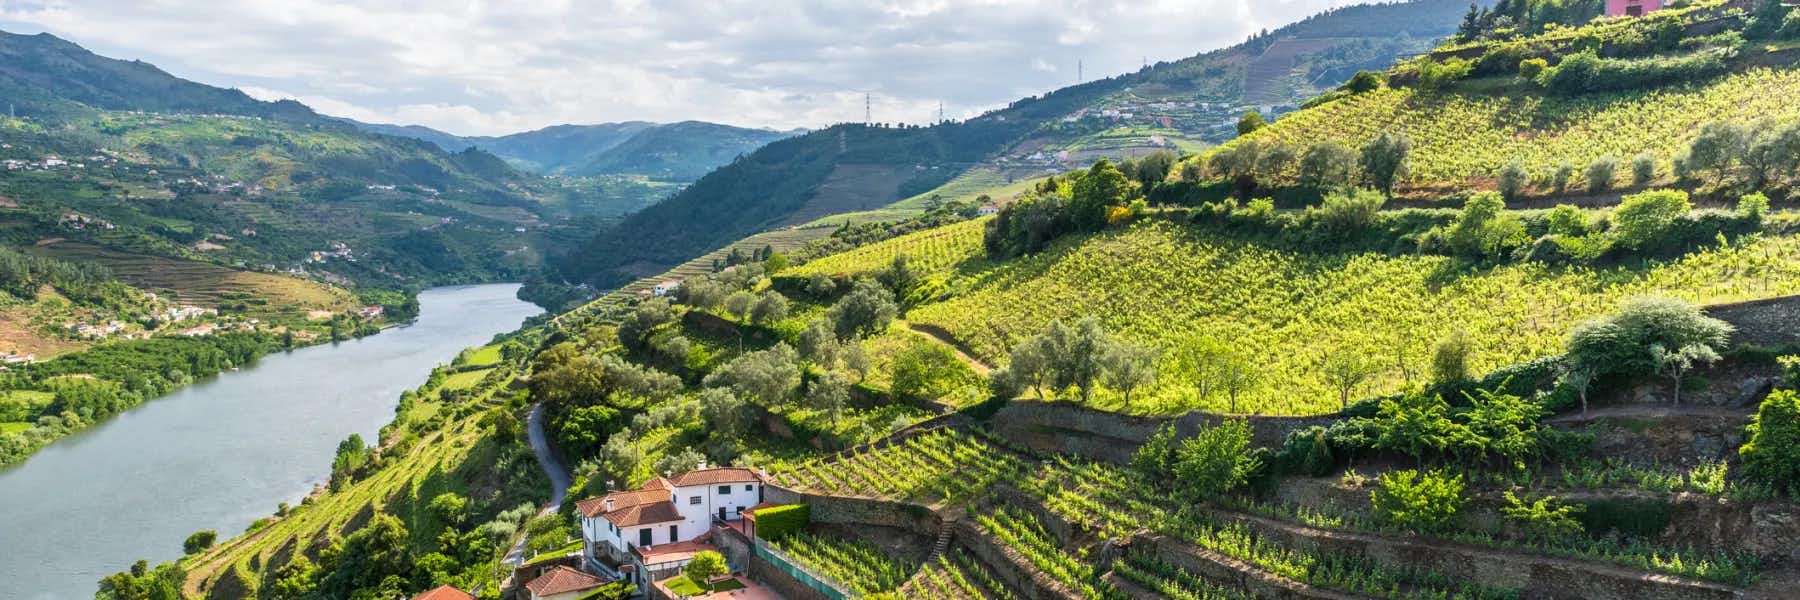 “We Bought Our 17-Acre Farm in Portugal for Under $225,000”